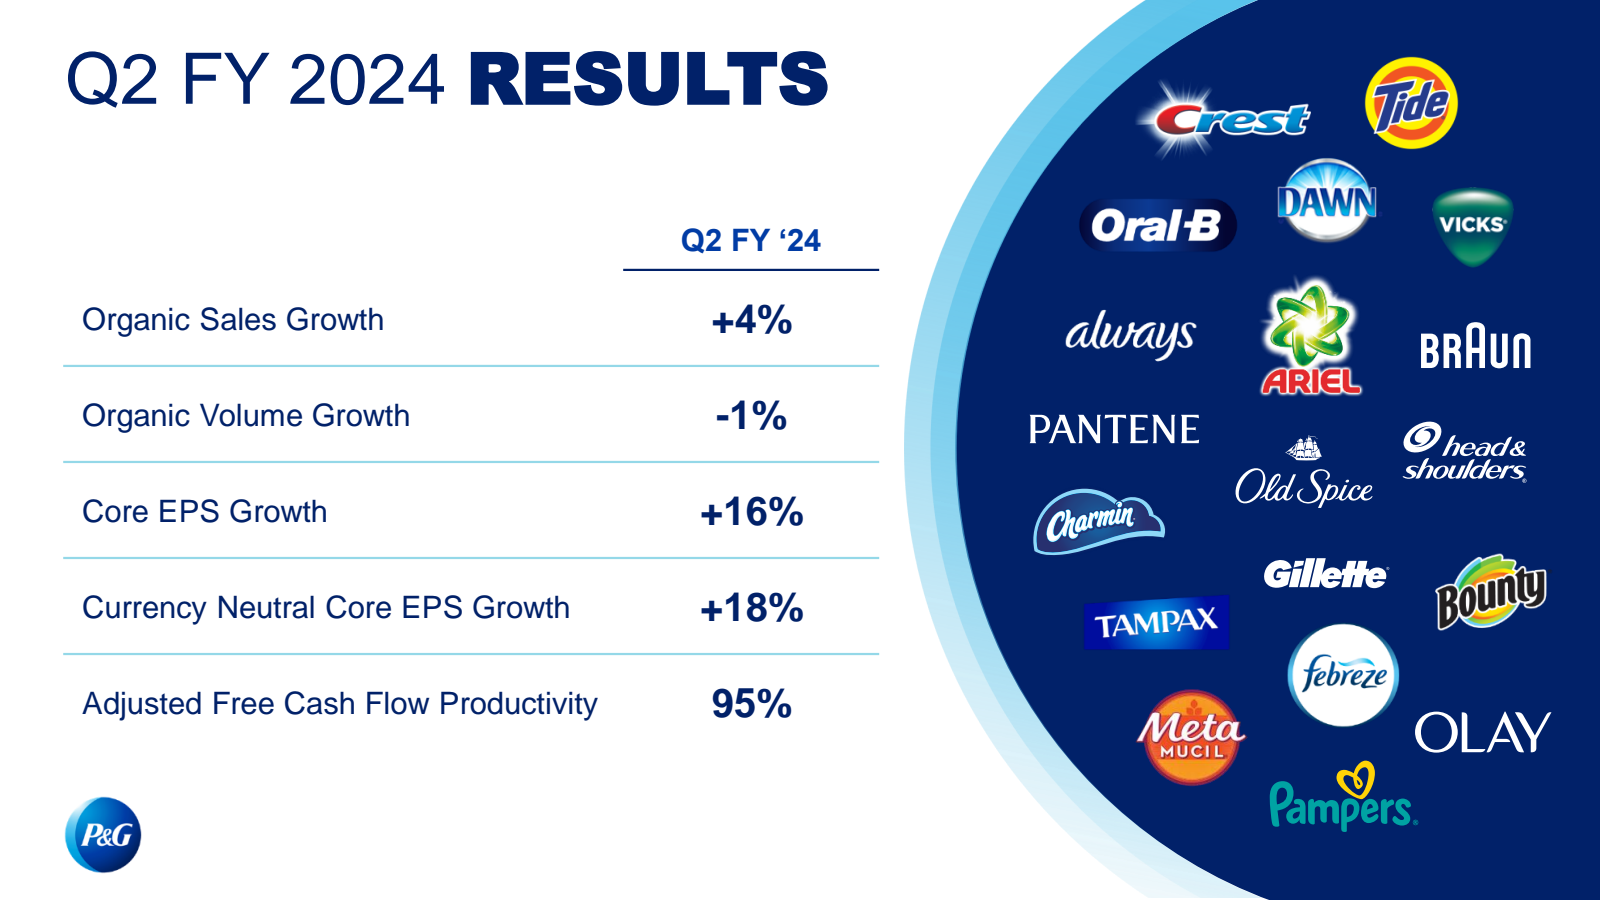 Q2 FY 2024 RESULTS 
